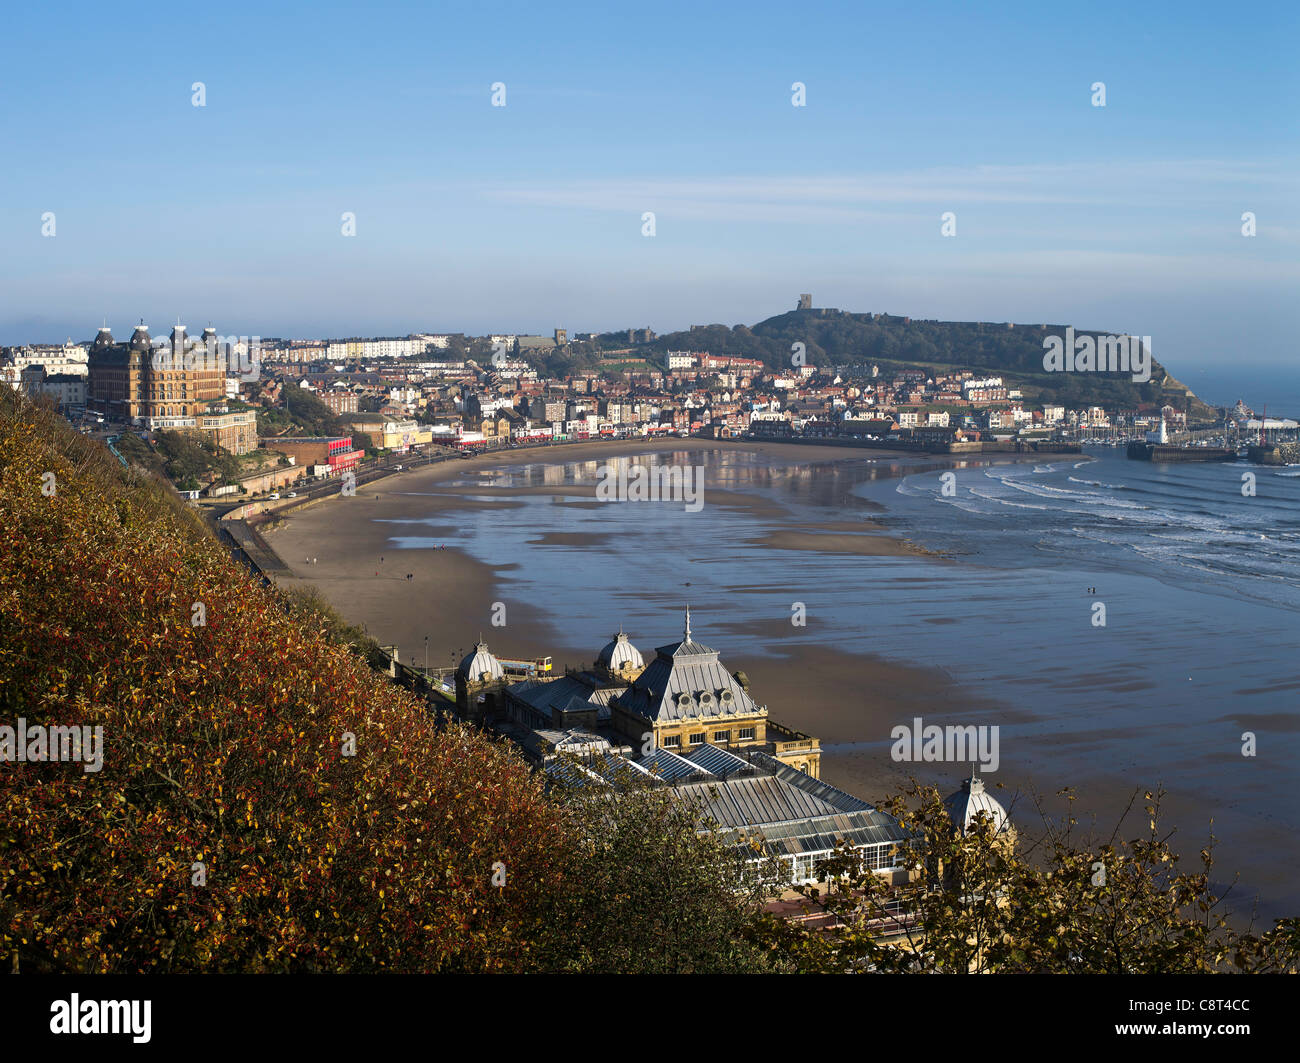 dh South Bay SCARBOROUGH NORTH YORKSHIRE English Seaside beach town bay harbour and The Spa autumn sea front resort uk coast Stock Photo